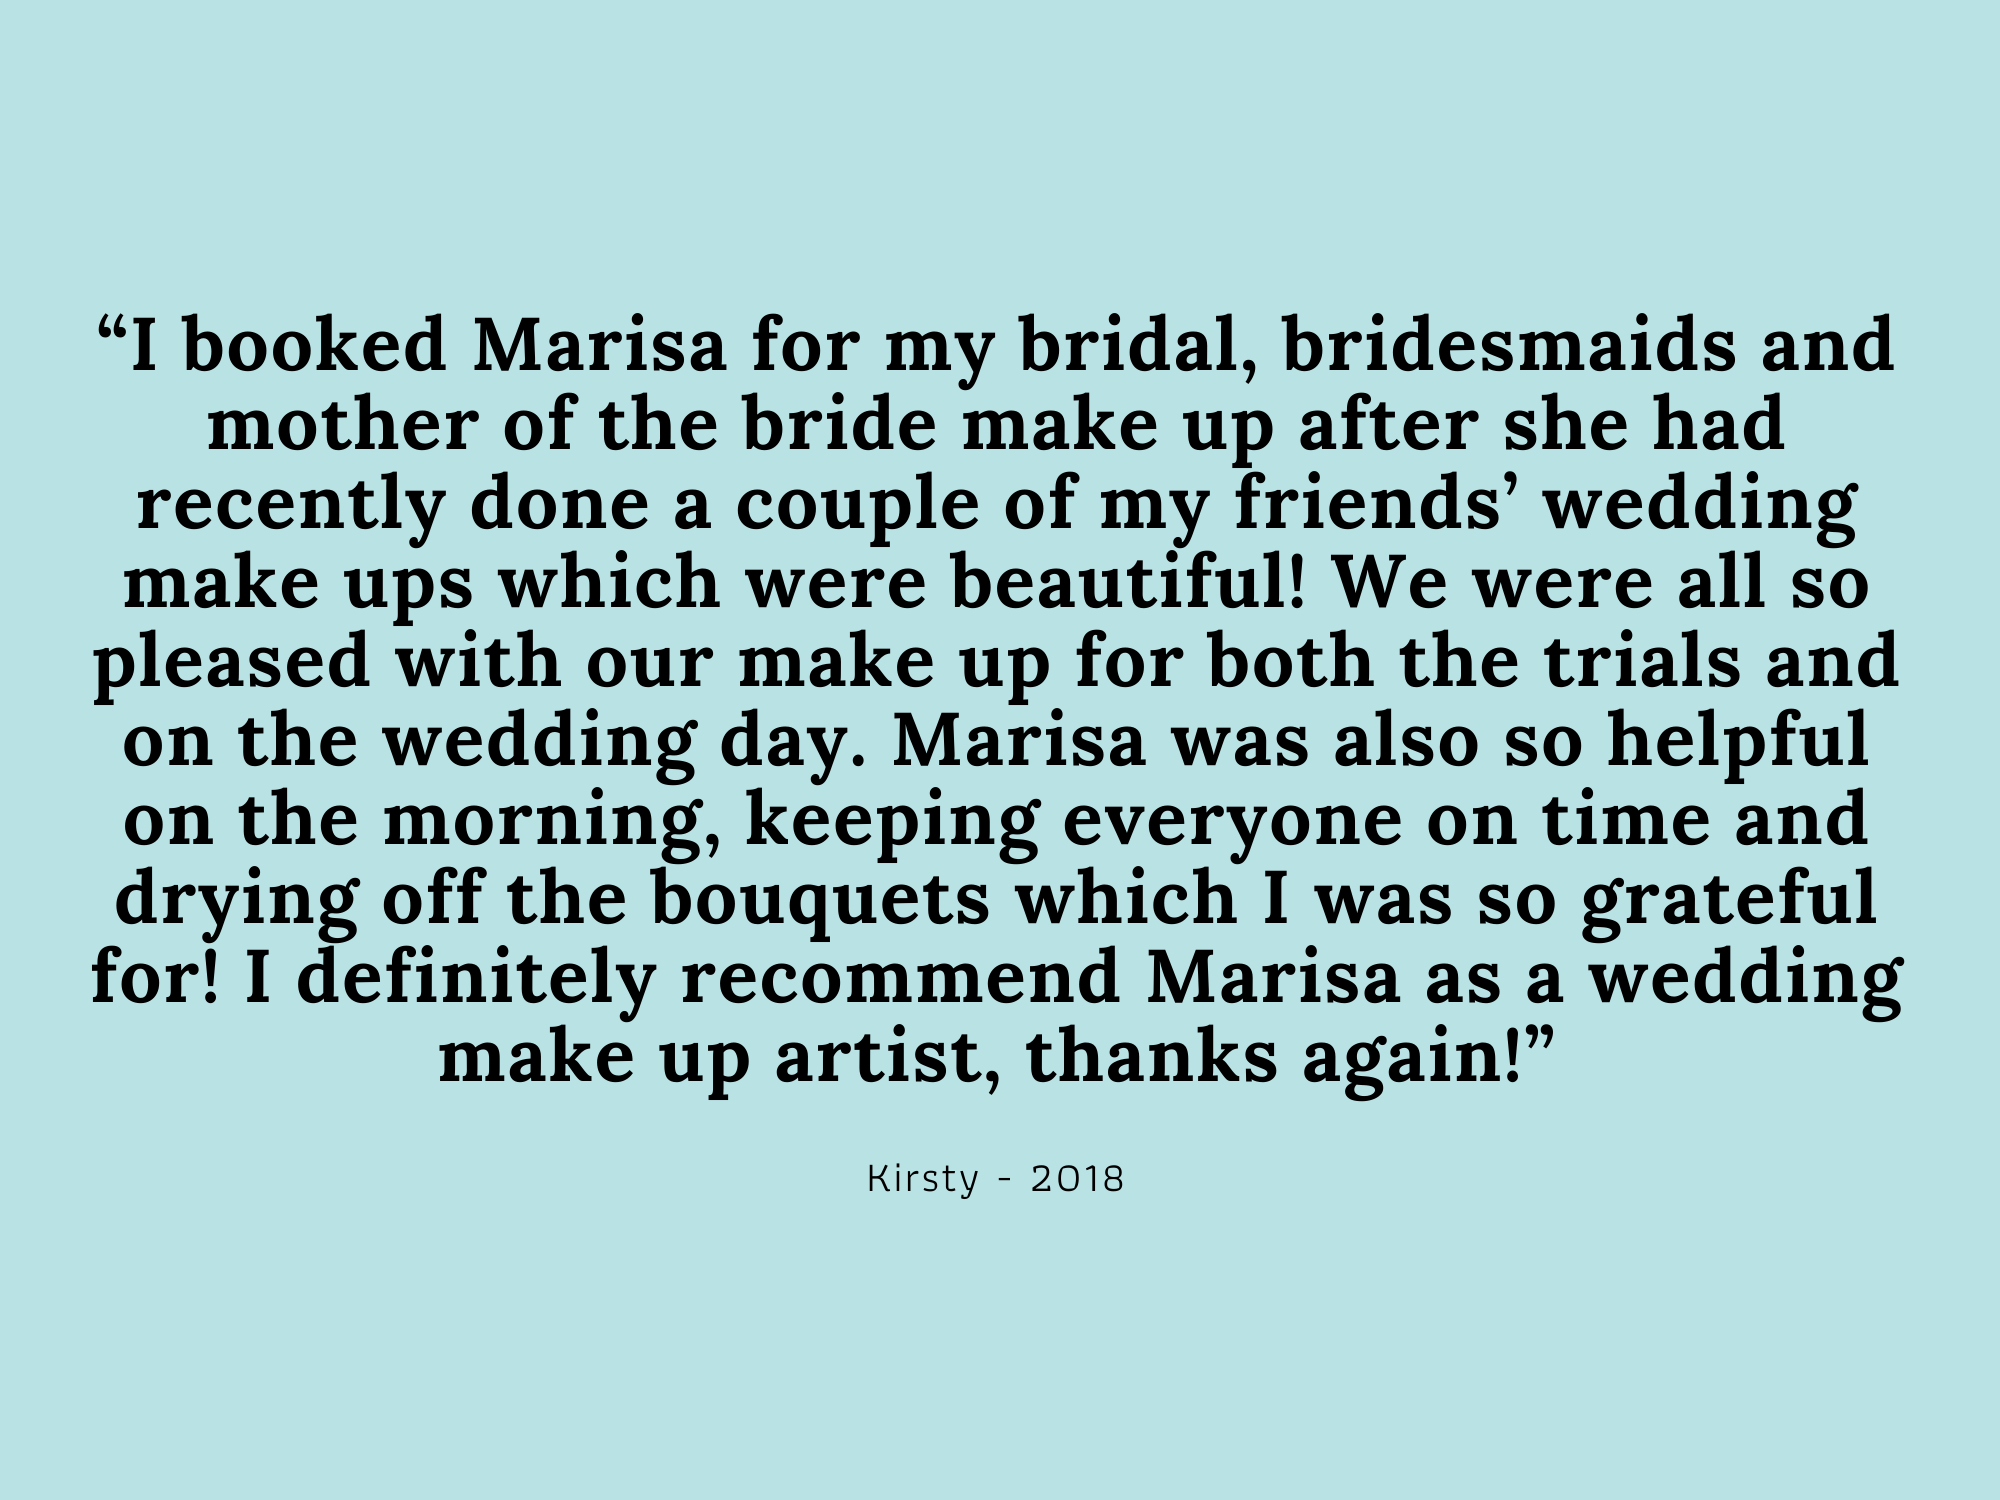 “I booked Marisa for my bridal, bridesmaids and mother of the bride make up after she had recently done a couple of my friends’ wedding make ups which were beautiful! We were all so pleased with our make up for both -2.png